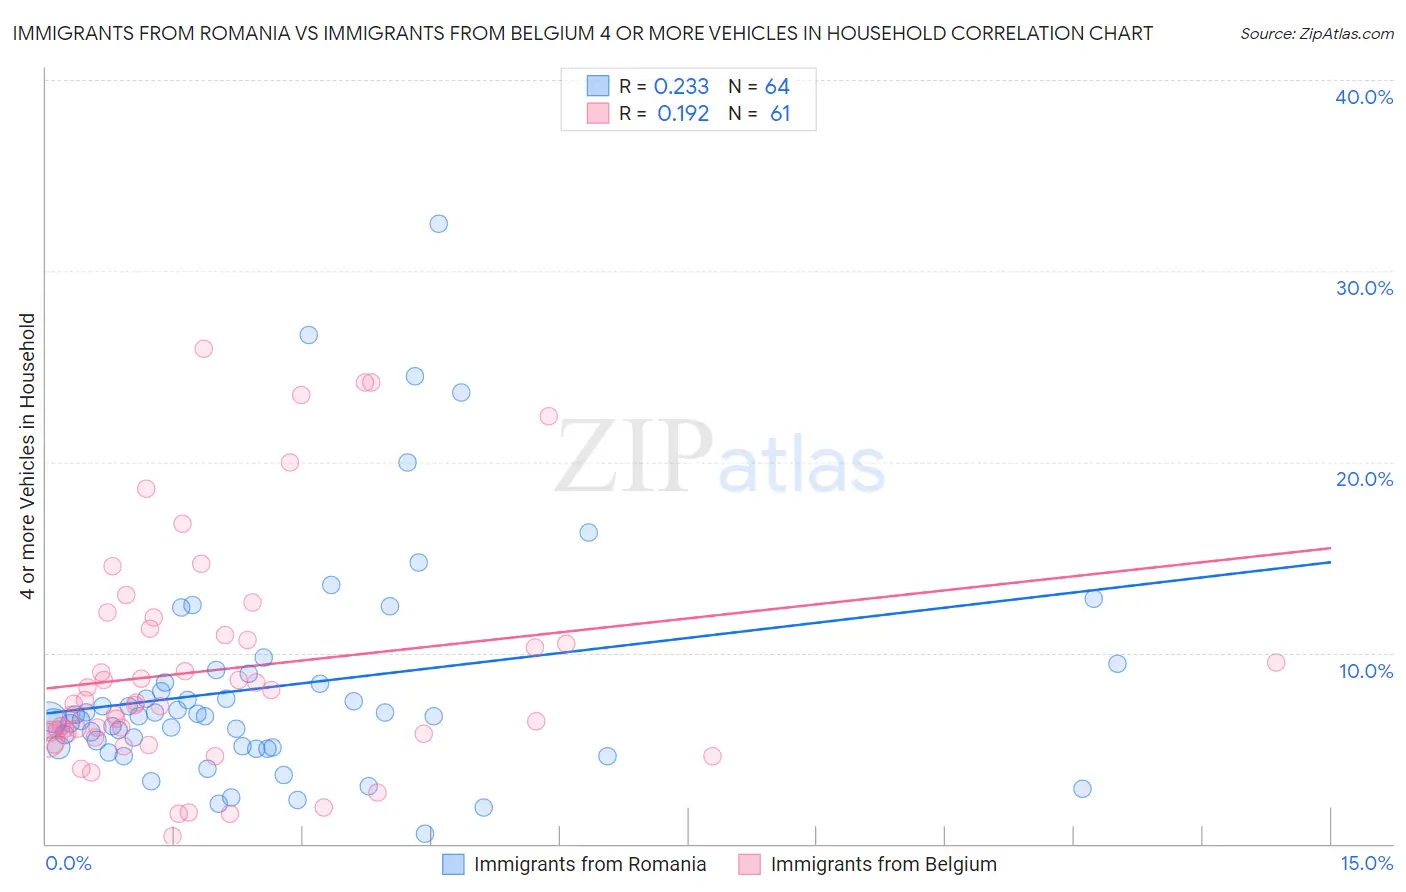 Immigrants from Romania vs Immigrants from Belgium 4 or more Vehicles in Household